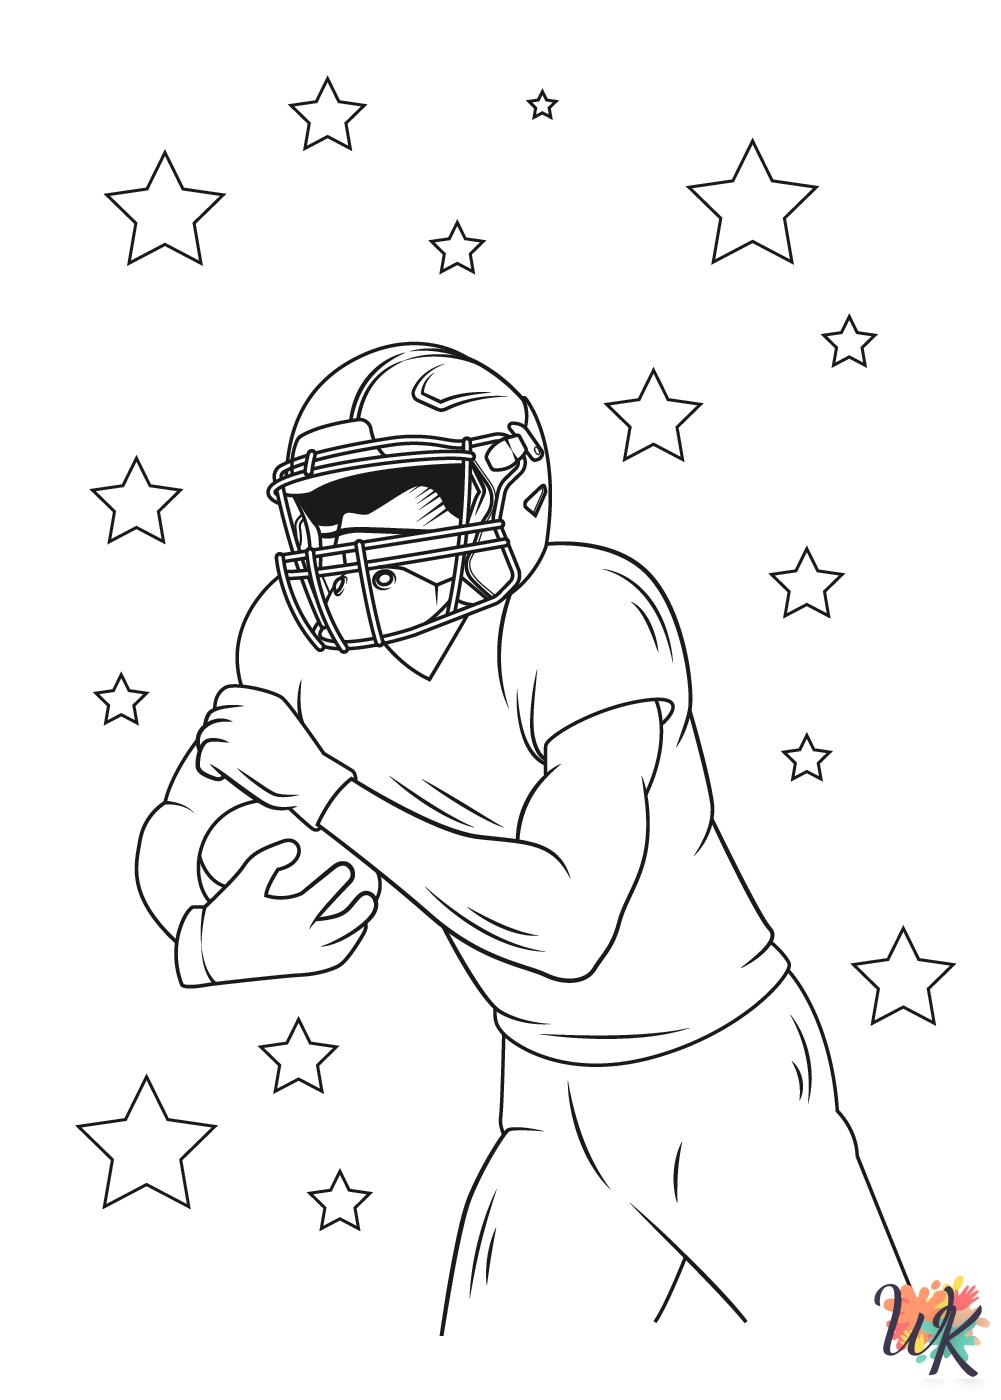 easy NFL coloring pages